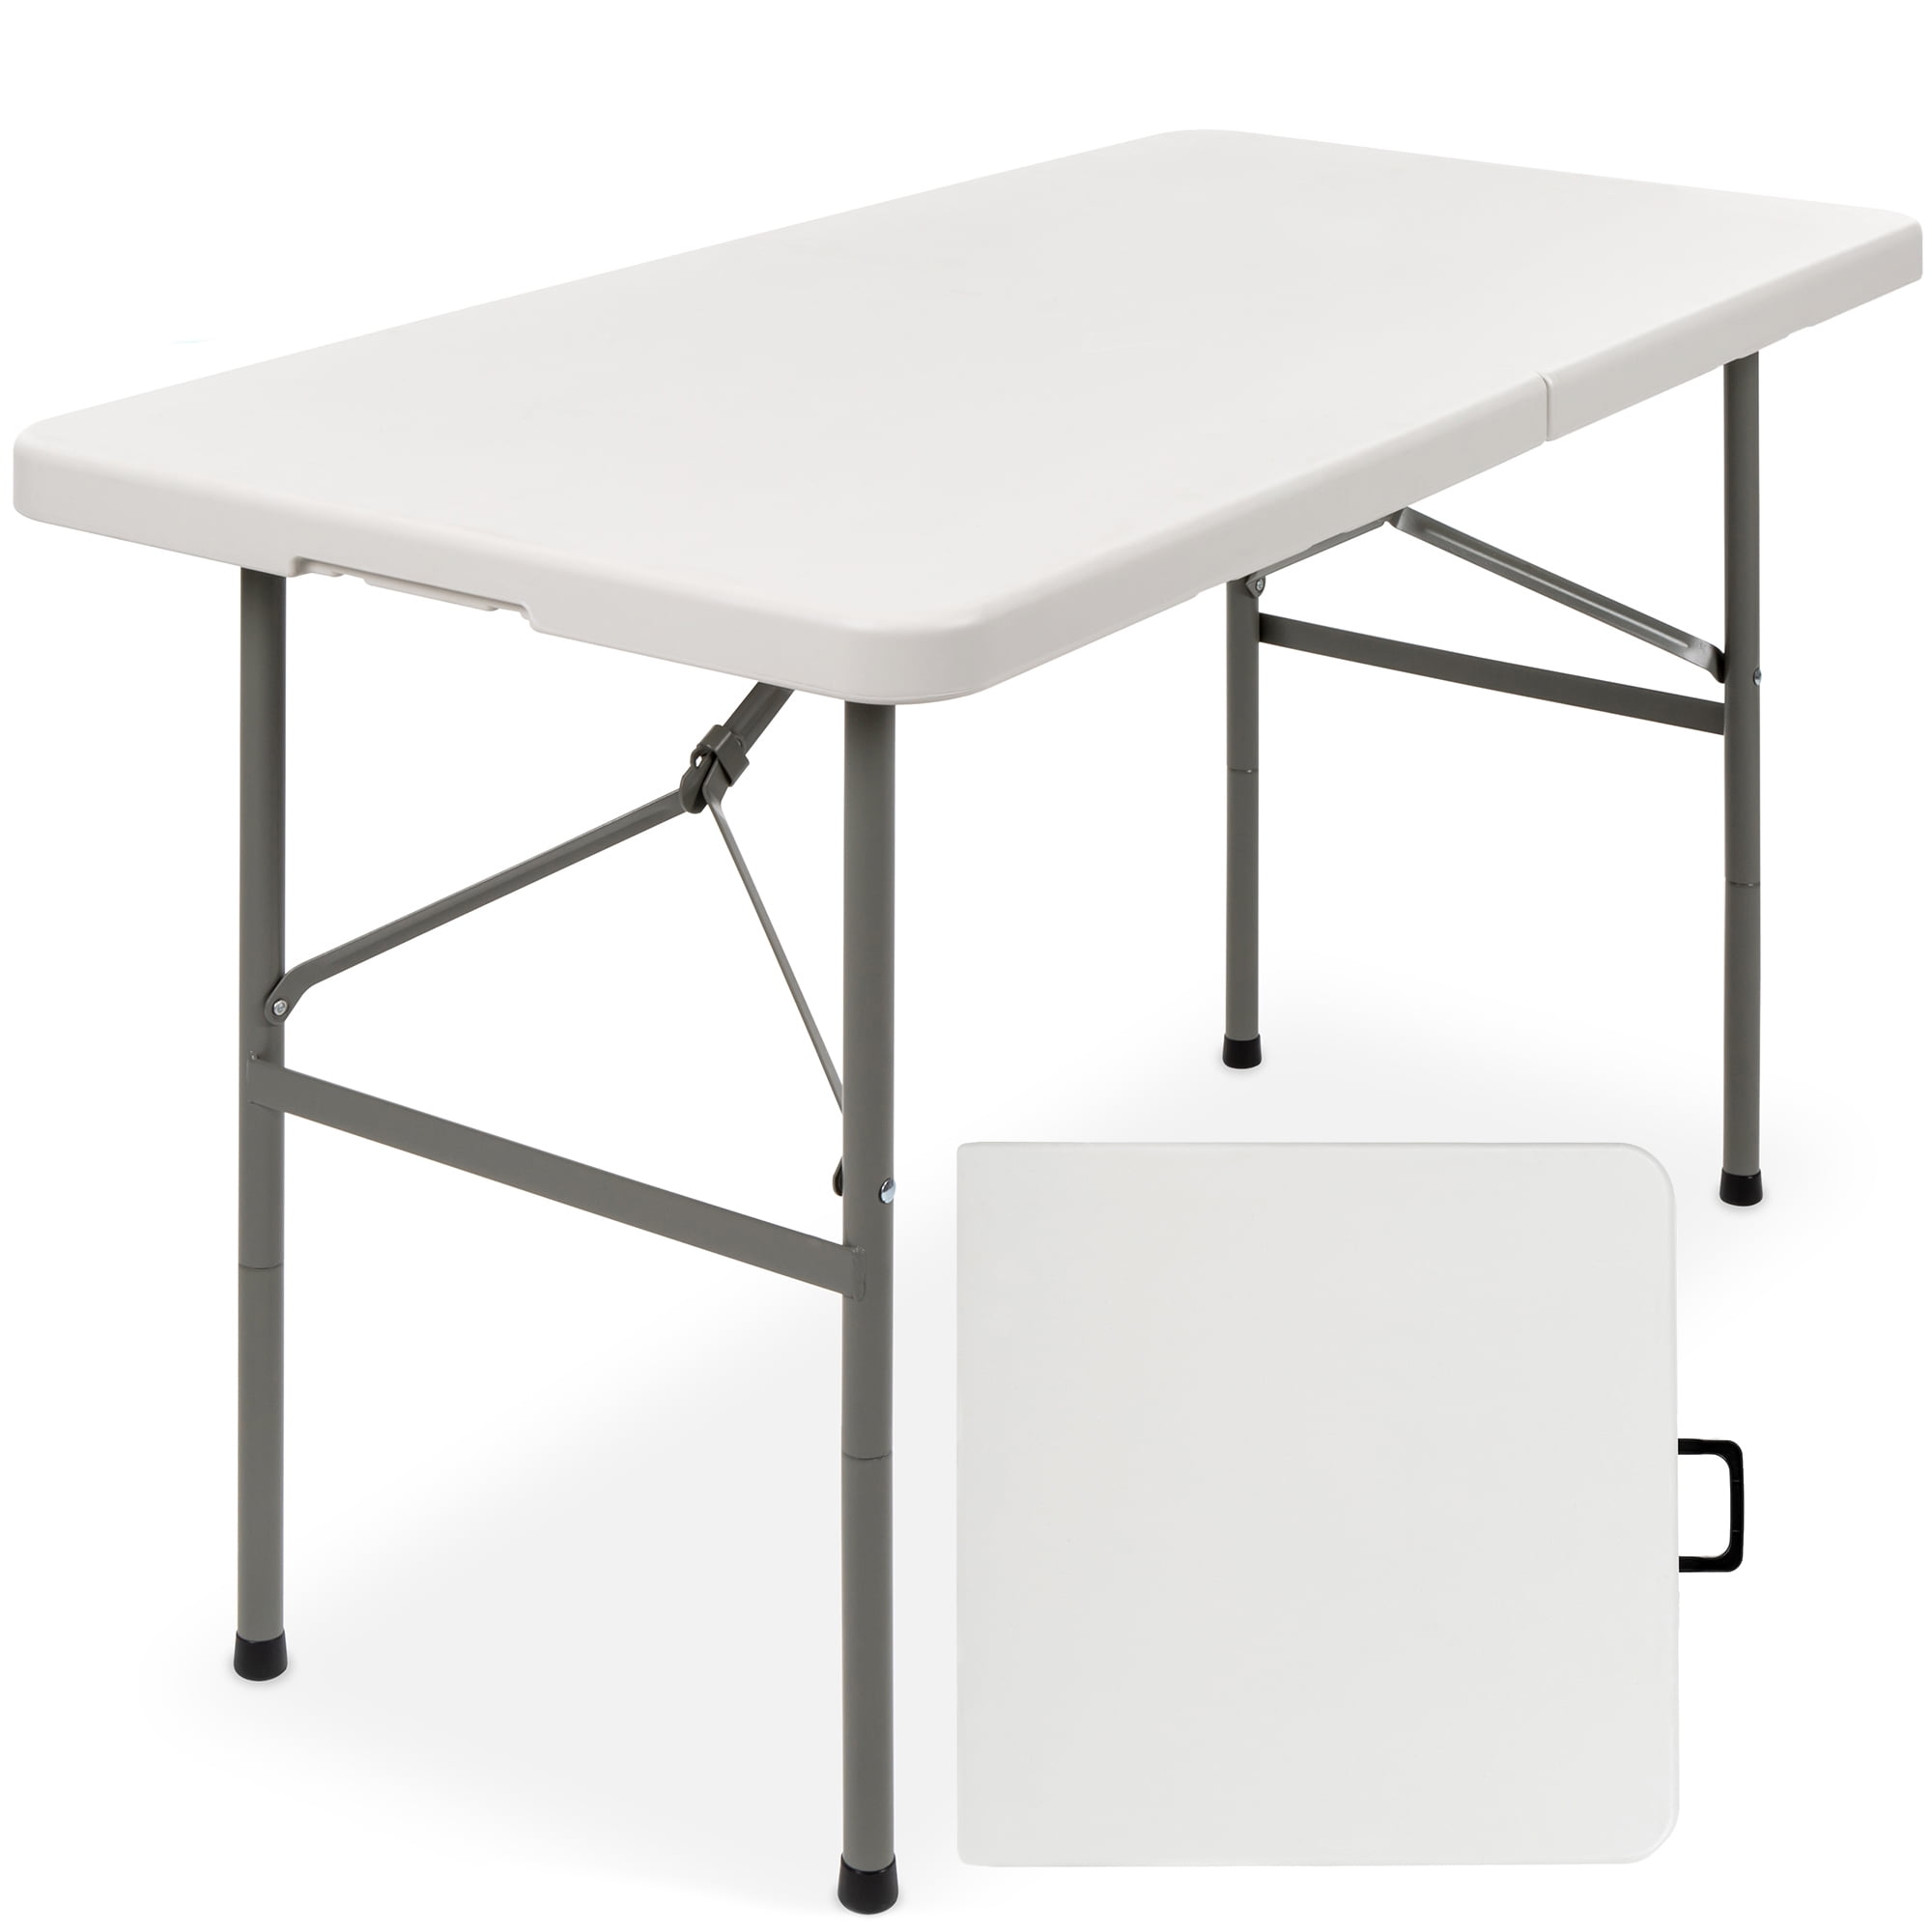 4FT Folding Table 4 Stools Indoor Outdoor Picnic BBQ Party Portable Desk White 